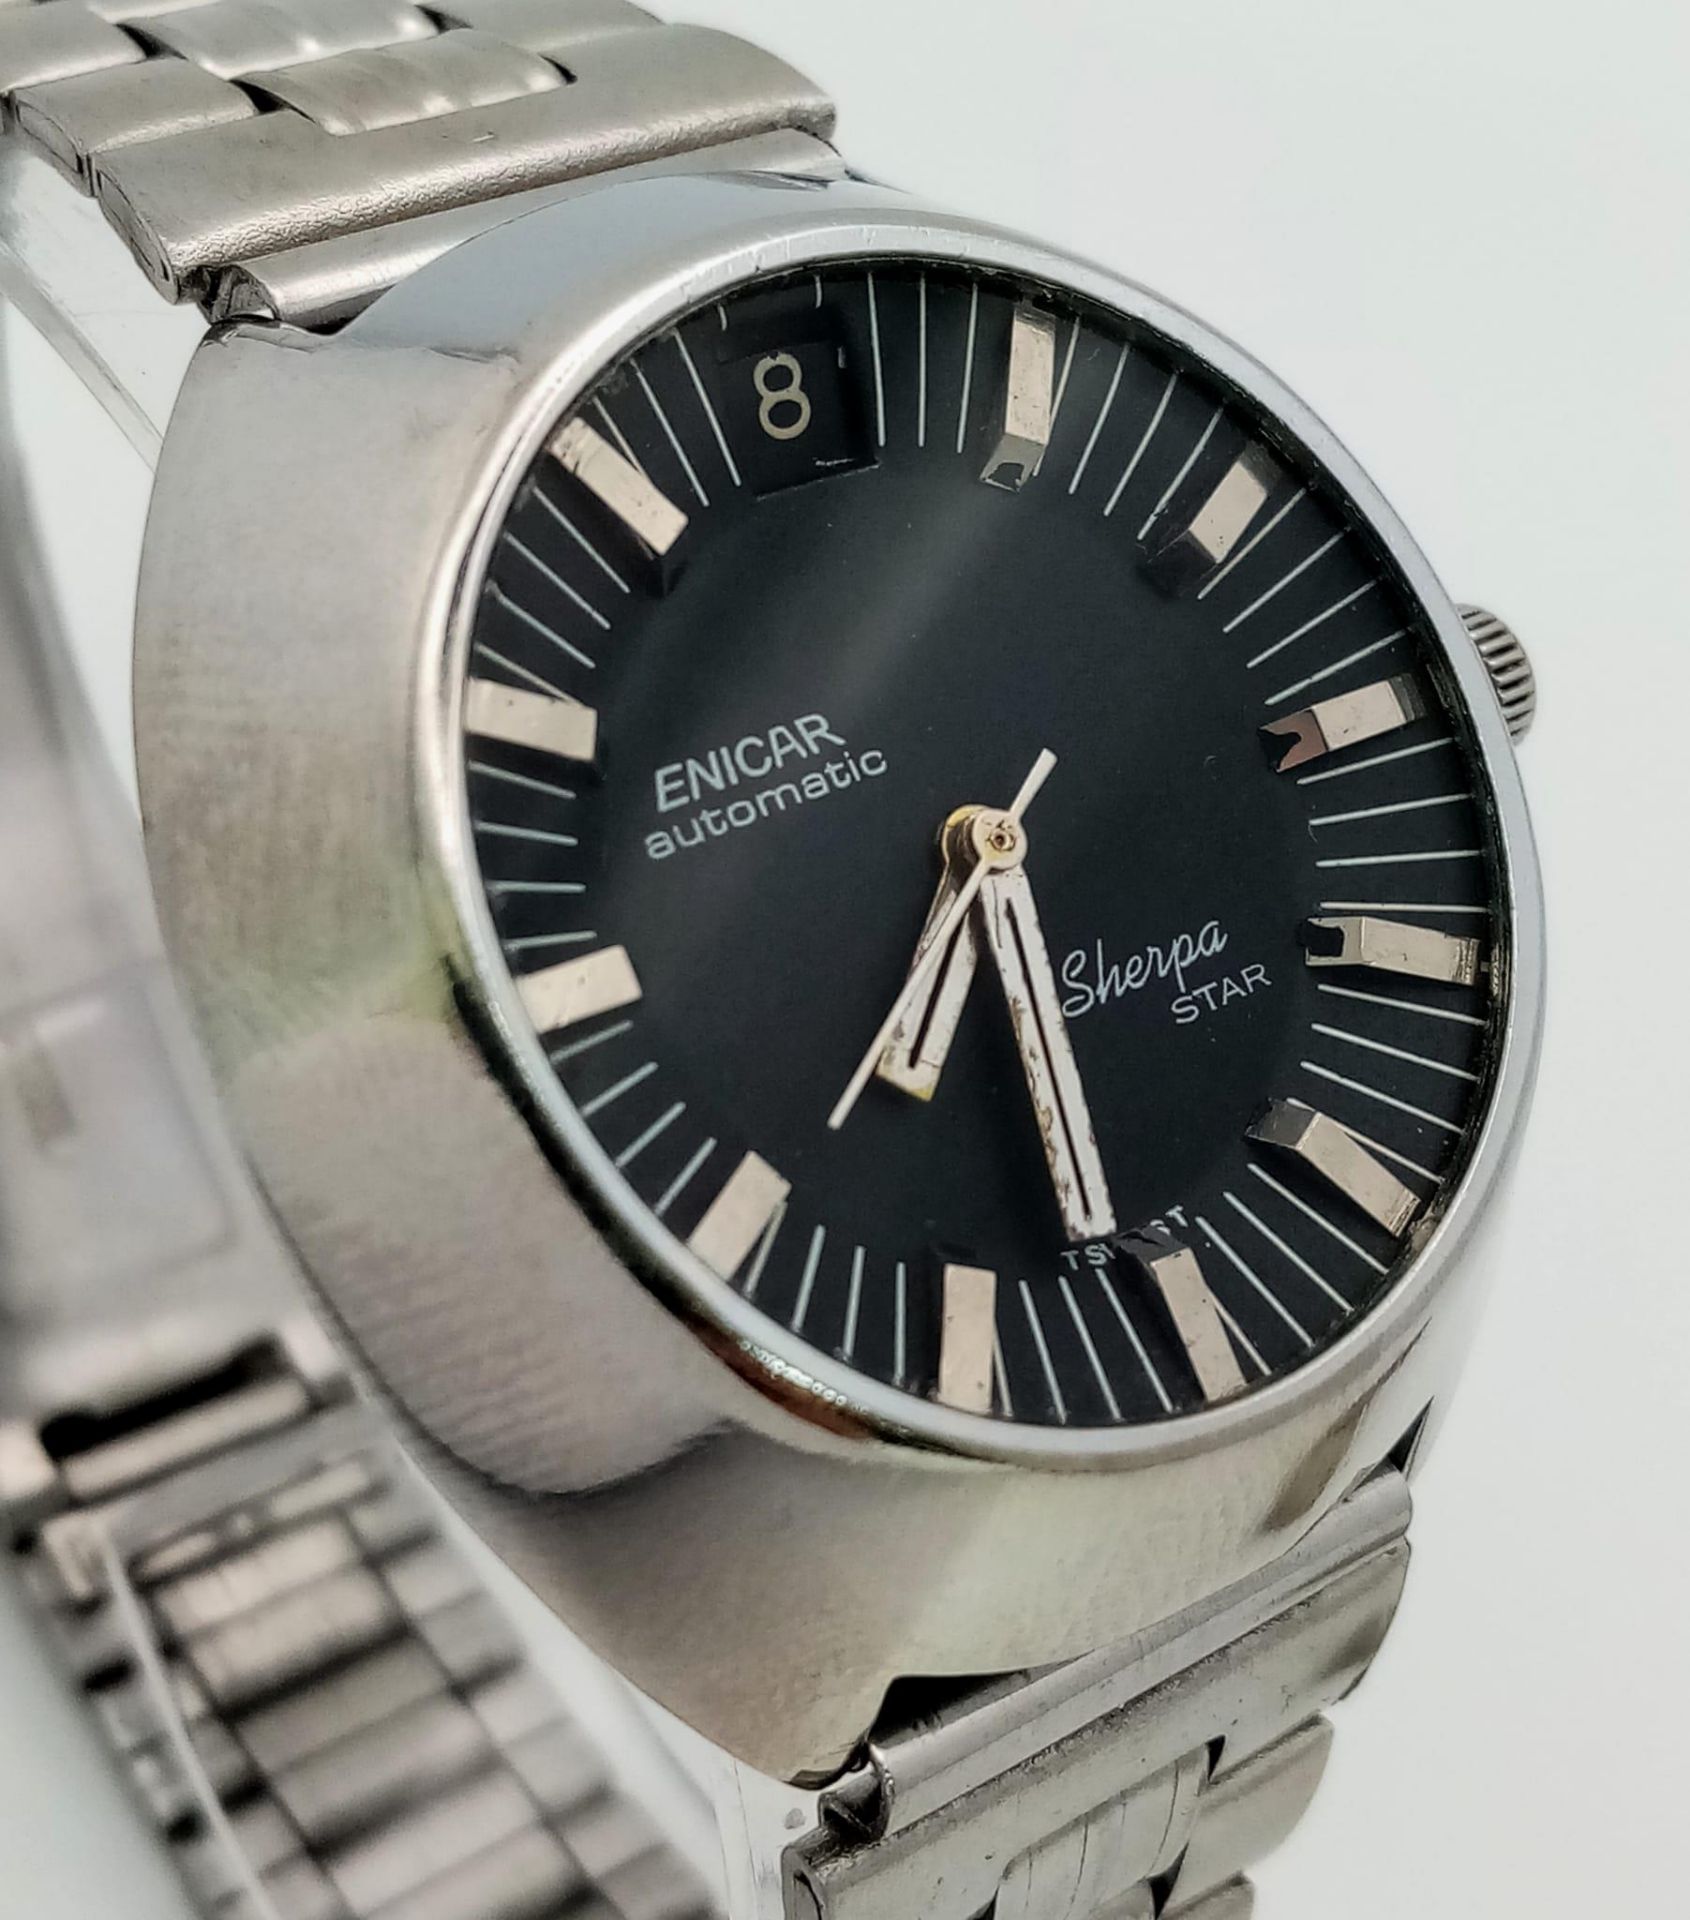 A Very Rare Enicar Sherpa Automatic Gents Watch. Stainless steel strap and case - 38mm. Black dial - Image 2 of 8